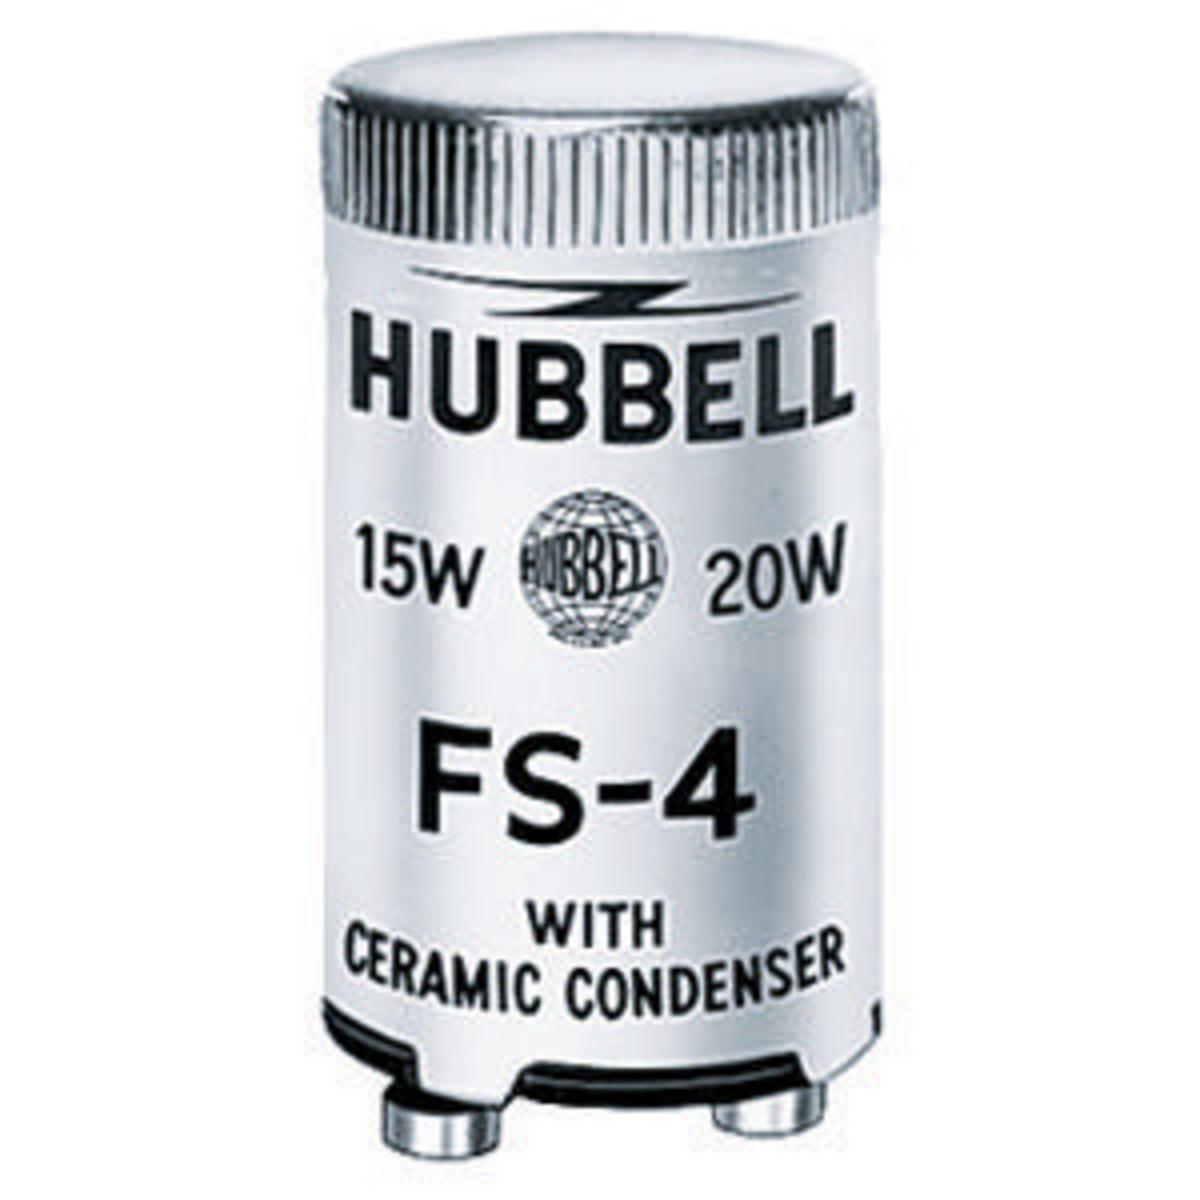 Hubbell FS4 Switches and Lighting Control, Fluorescent Starter, 13-30-40W  ; Rugged construction ; Operates over a wide temperature range ; Neostart lights in dual lamp circiut uniformly and quickly ; Standard Product